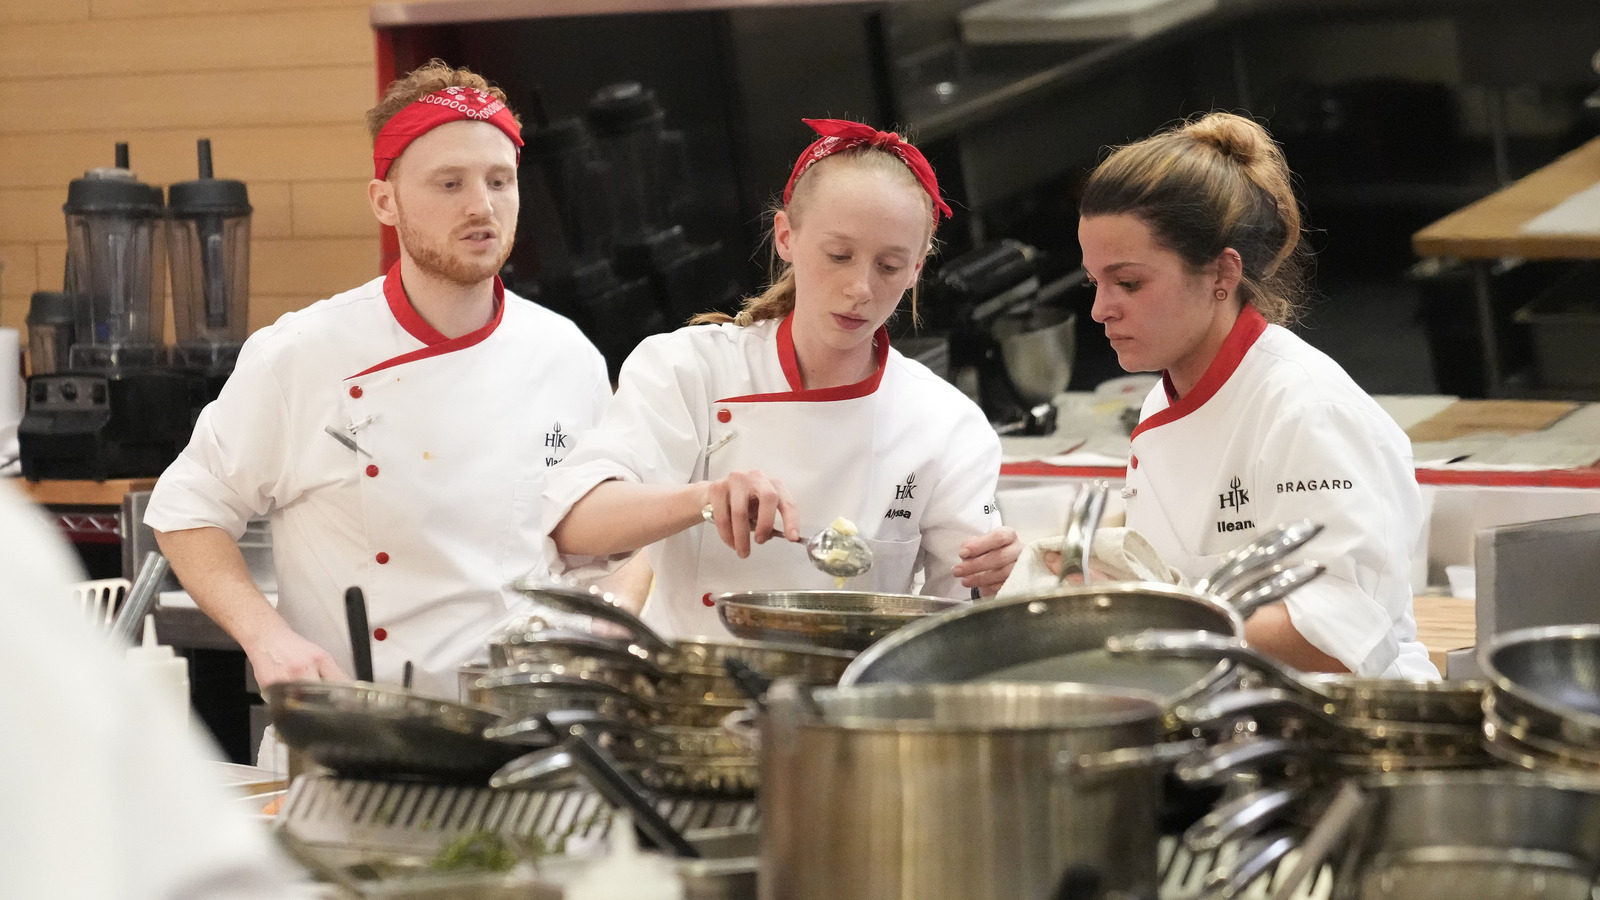 Hell's Kitchen: What Do The Contestants Do All Day?